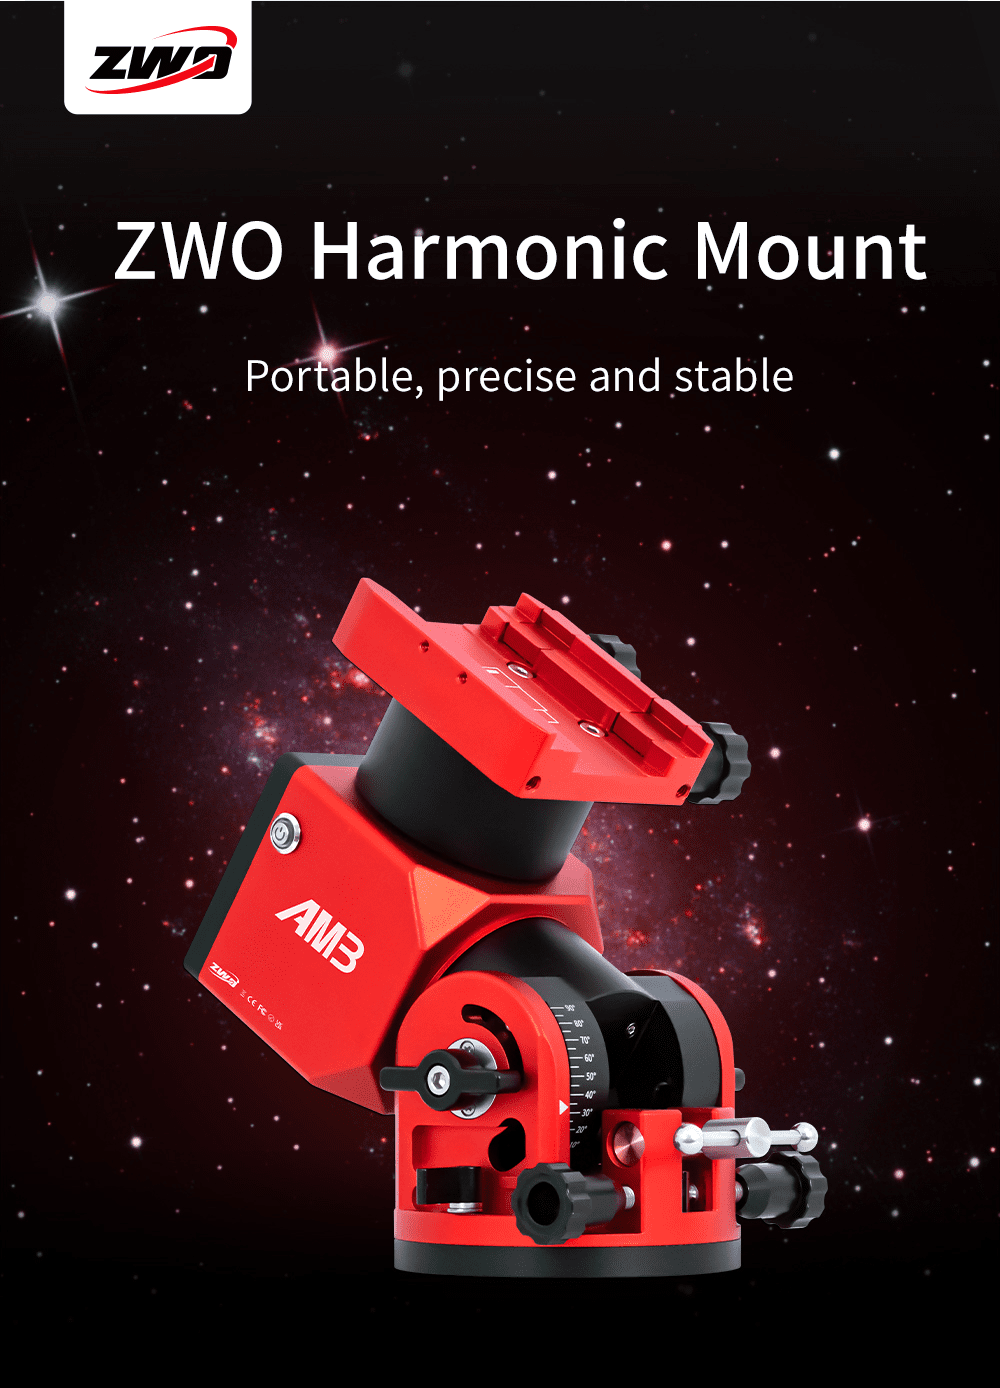 ZWO AM3 Mount: Advanced Astronomical Tracking for Stunning Night Sky Images